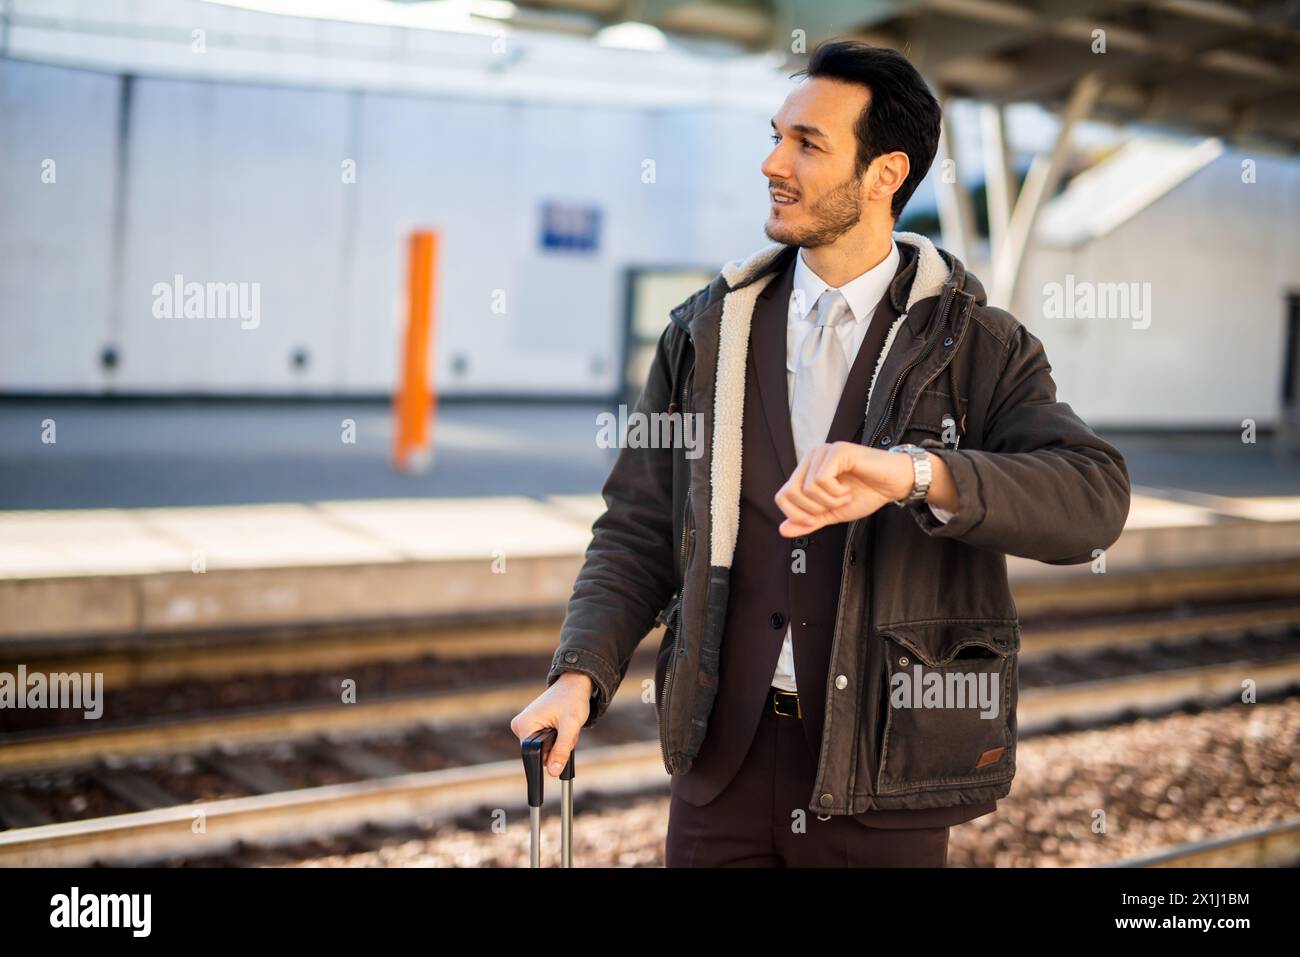 Young man in a suit checks his watch while waiting for the train, displaying urgency and time management Stock Photo